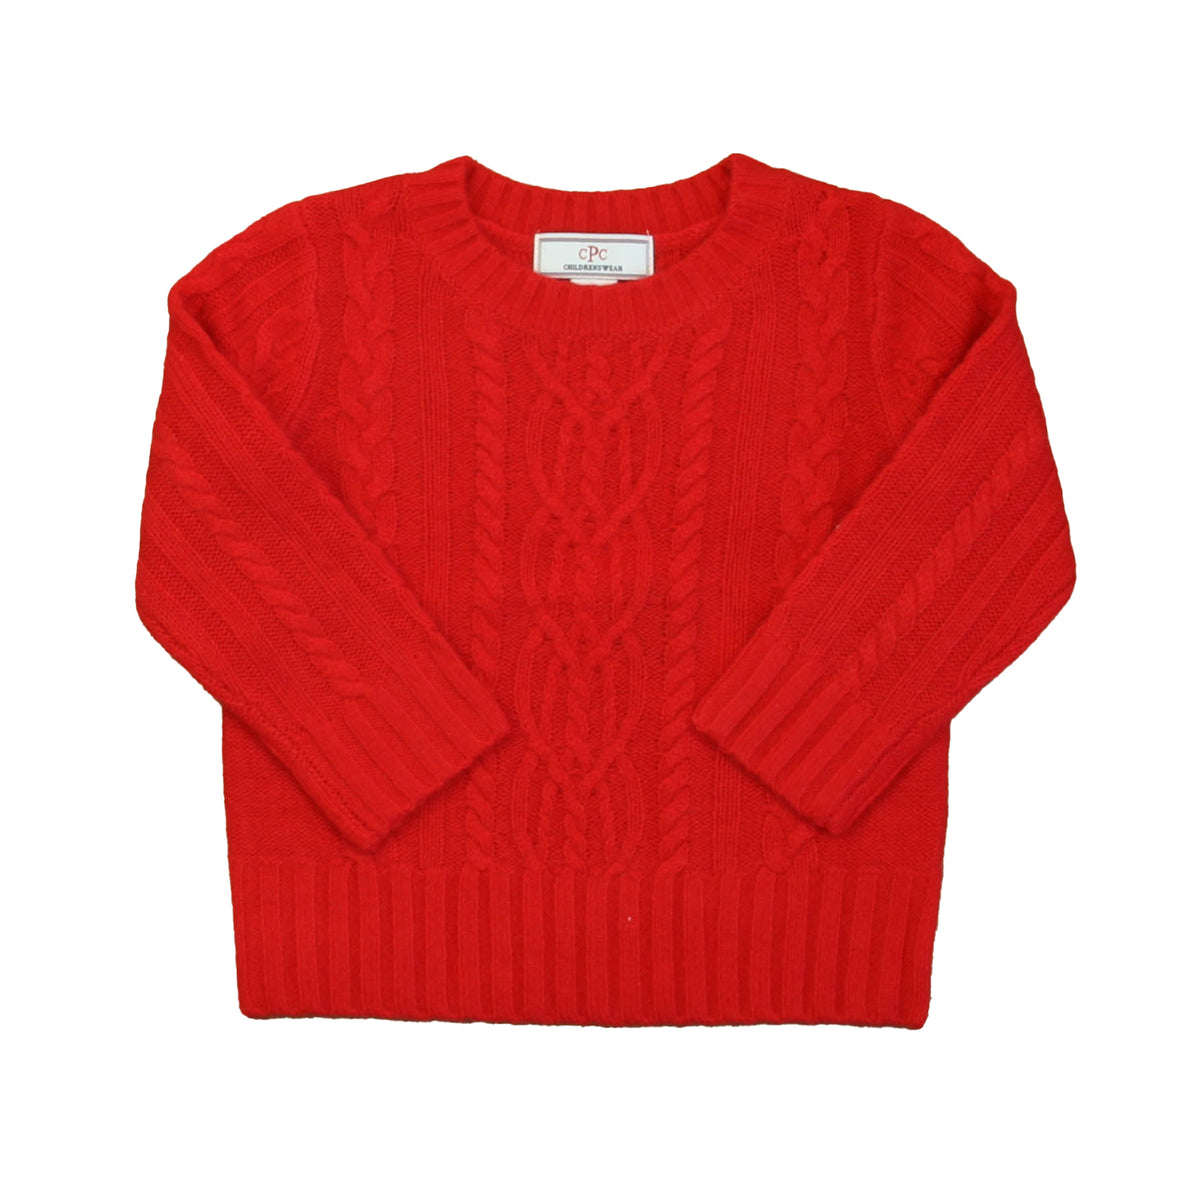 New with Tags: Tomato Sweater size: 2-5T -- FINAL SALE